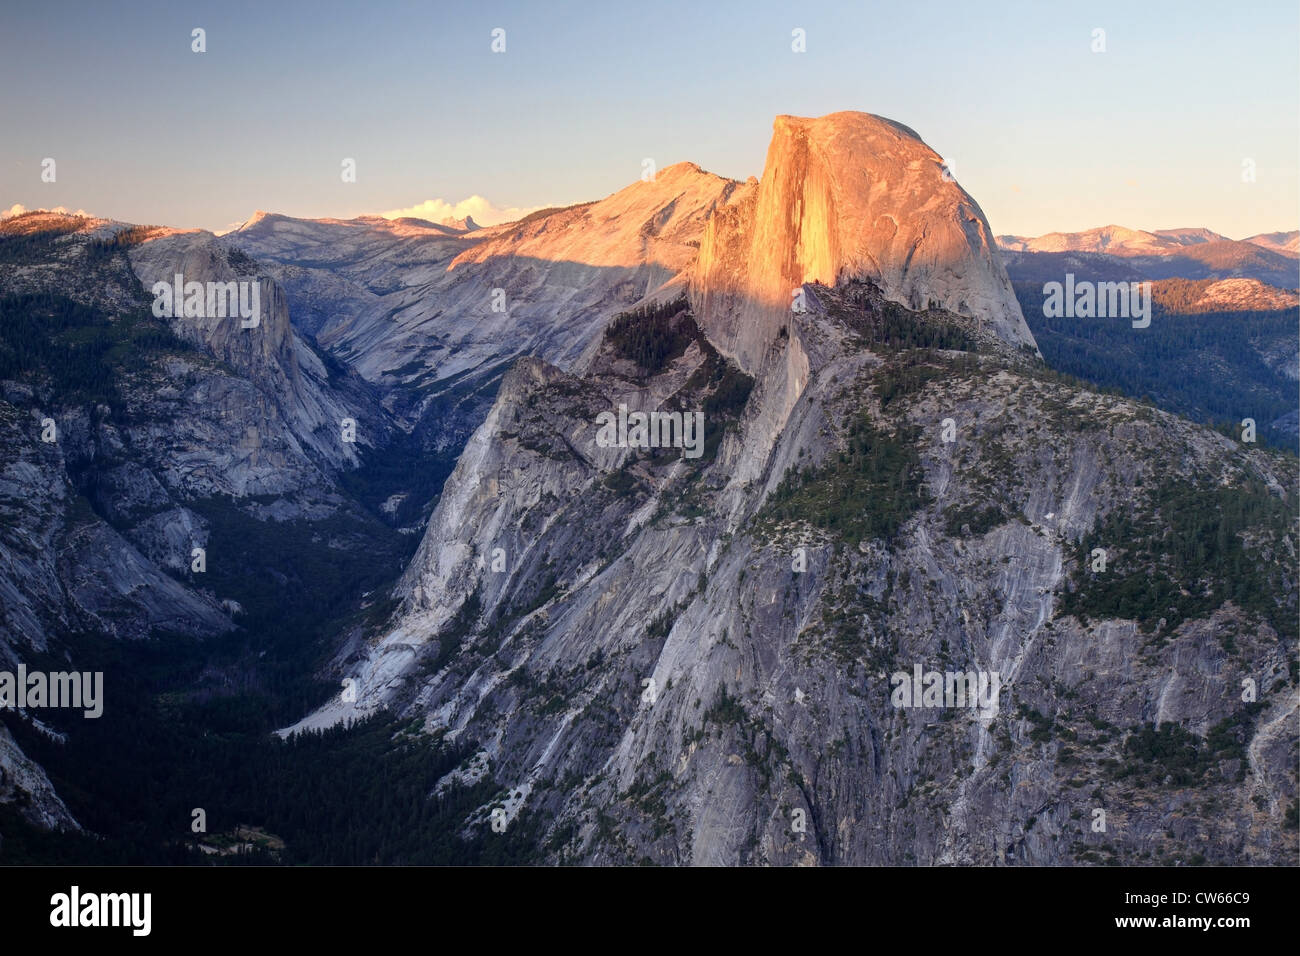 Sunset over Half Dome in Yosemite National Park, California. View from Glacier Point Stock Photo